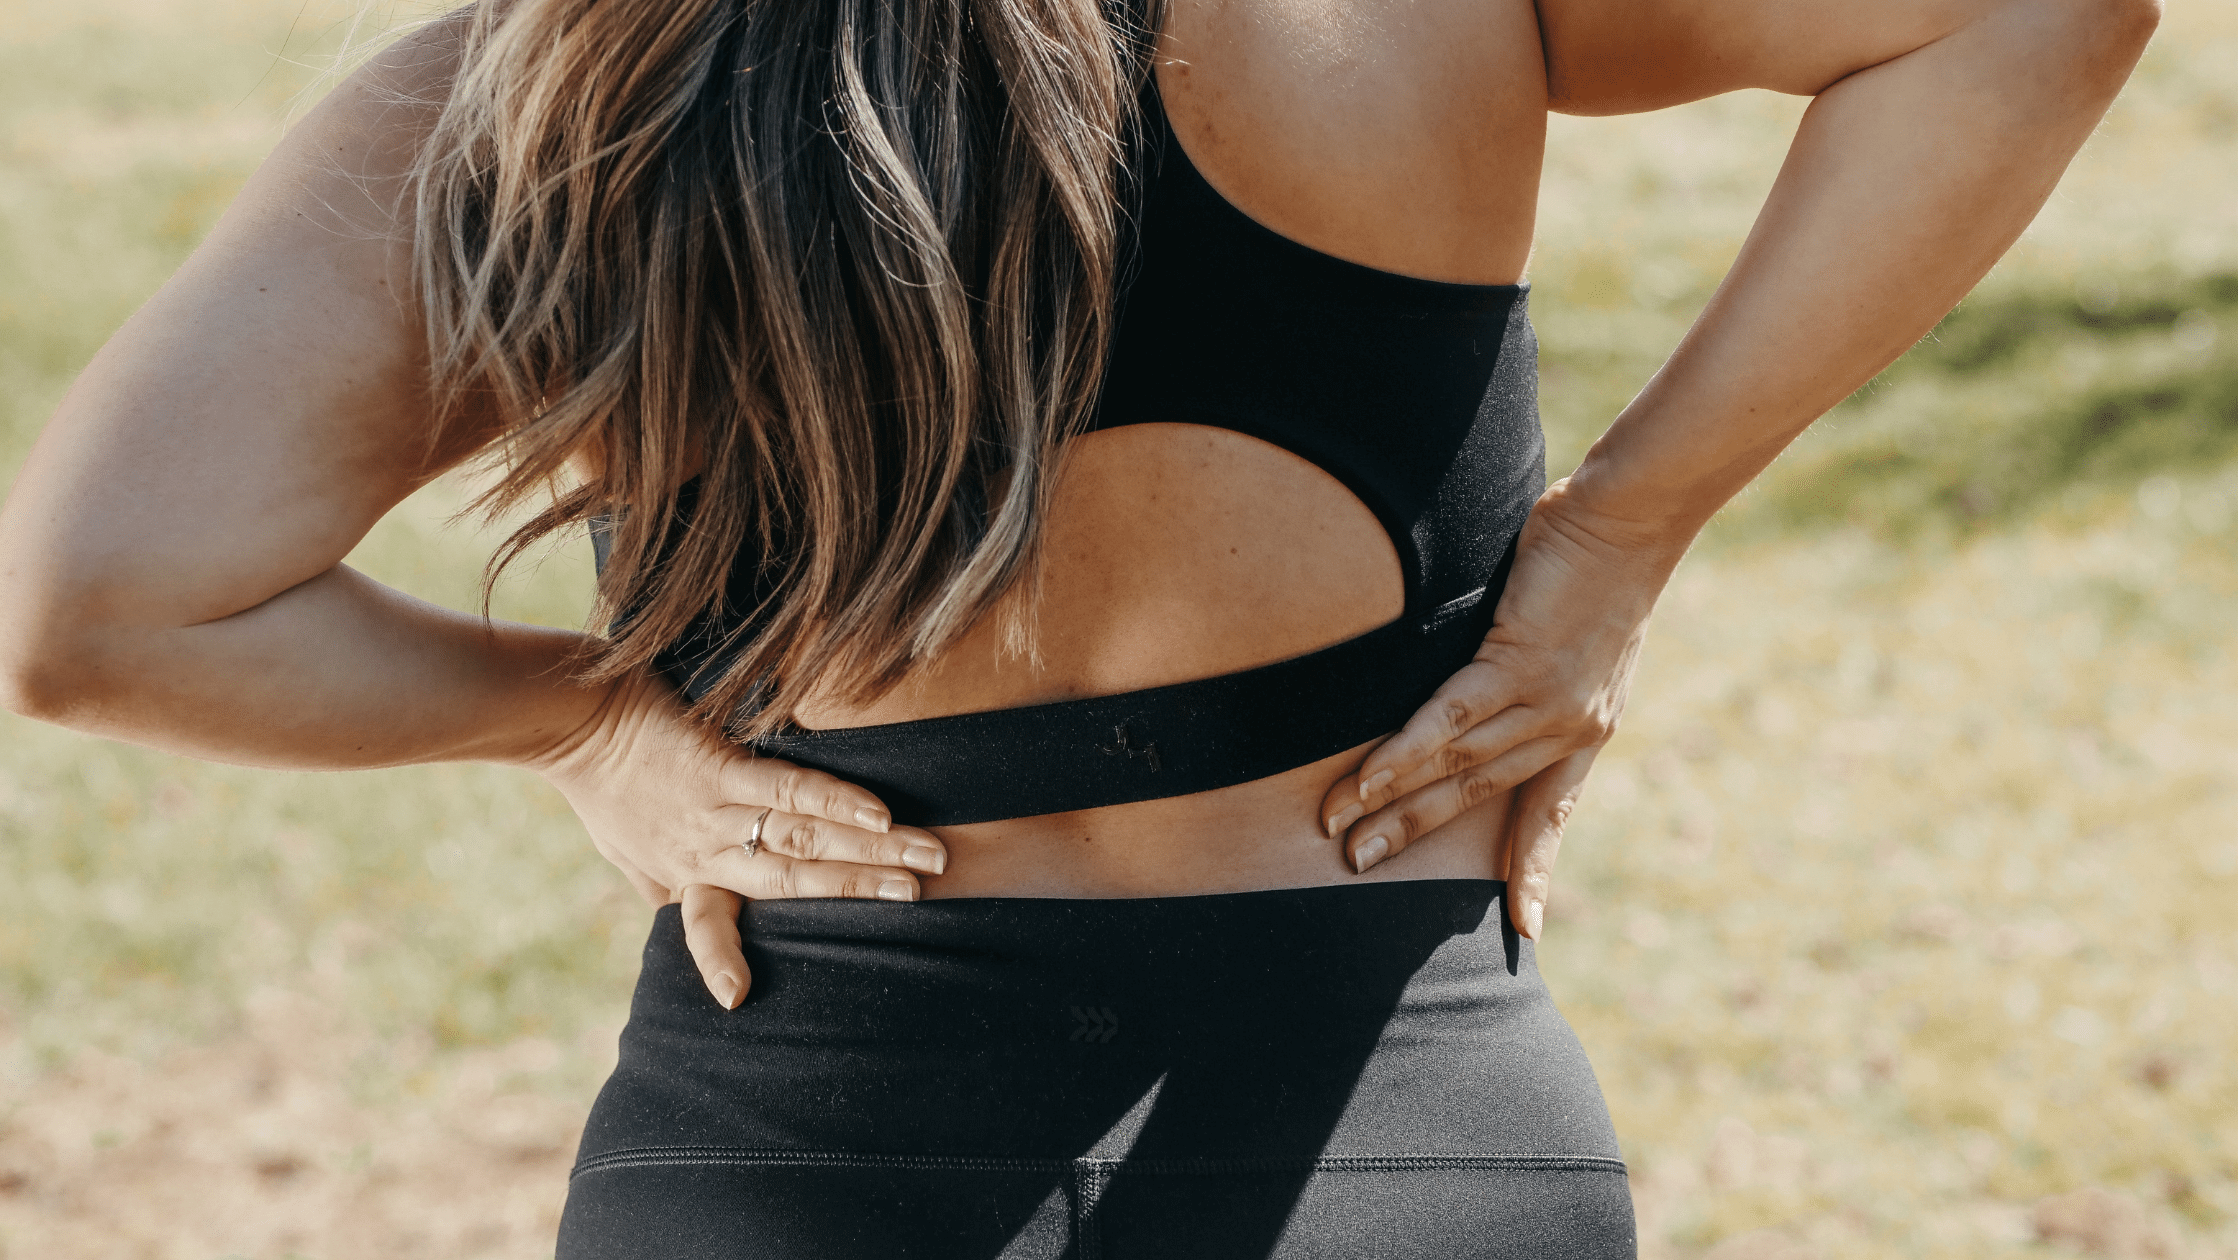 Physical Therapy For Scoliosis: How Can It Help?